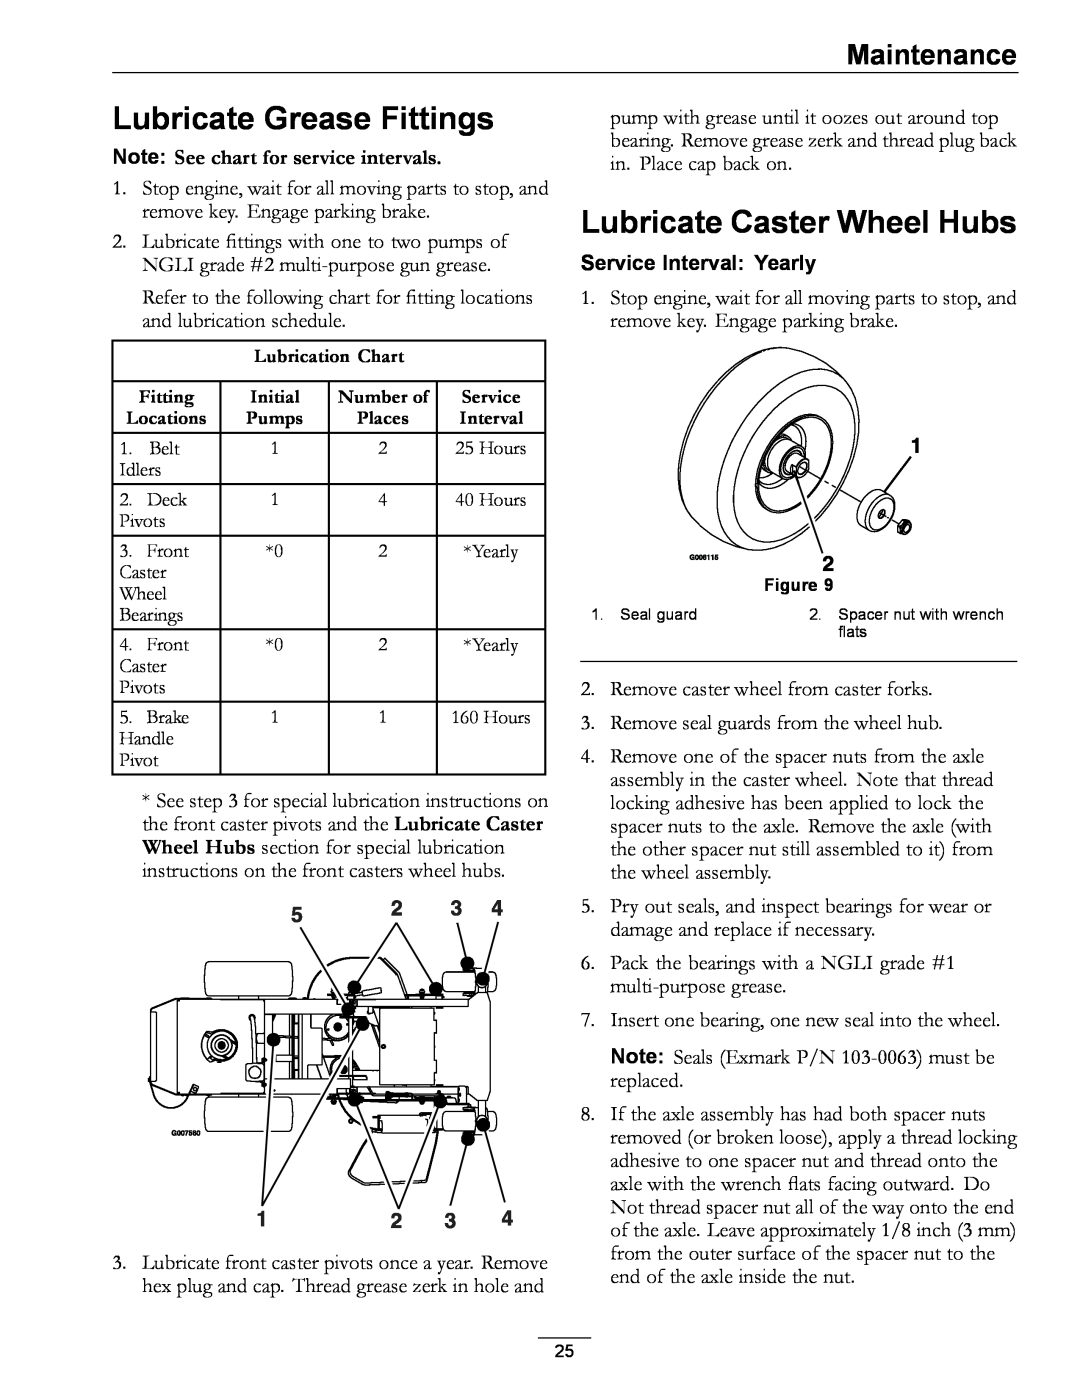 Exmark PHZ19KA343 manual Lubricate Grease Fittings, Lubricate Caster Wheel Hubs, Note See chart for service intervals 